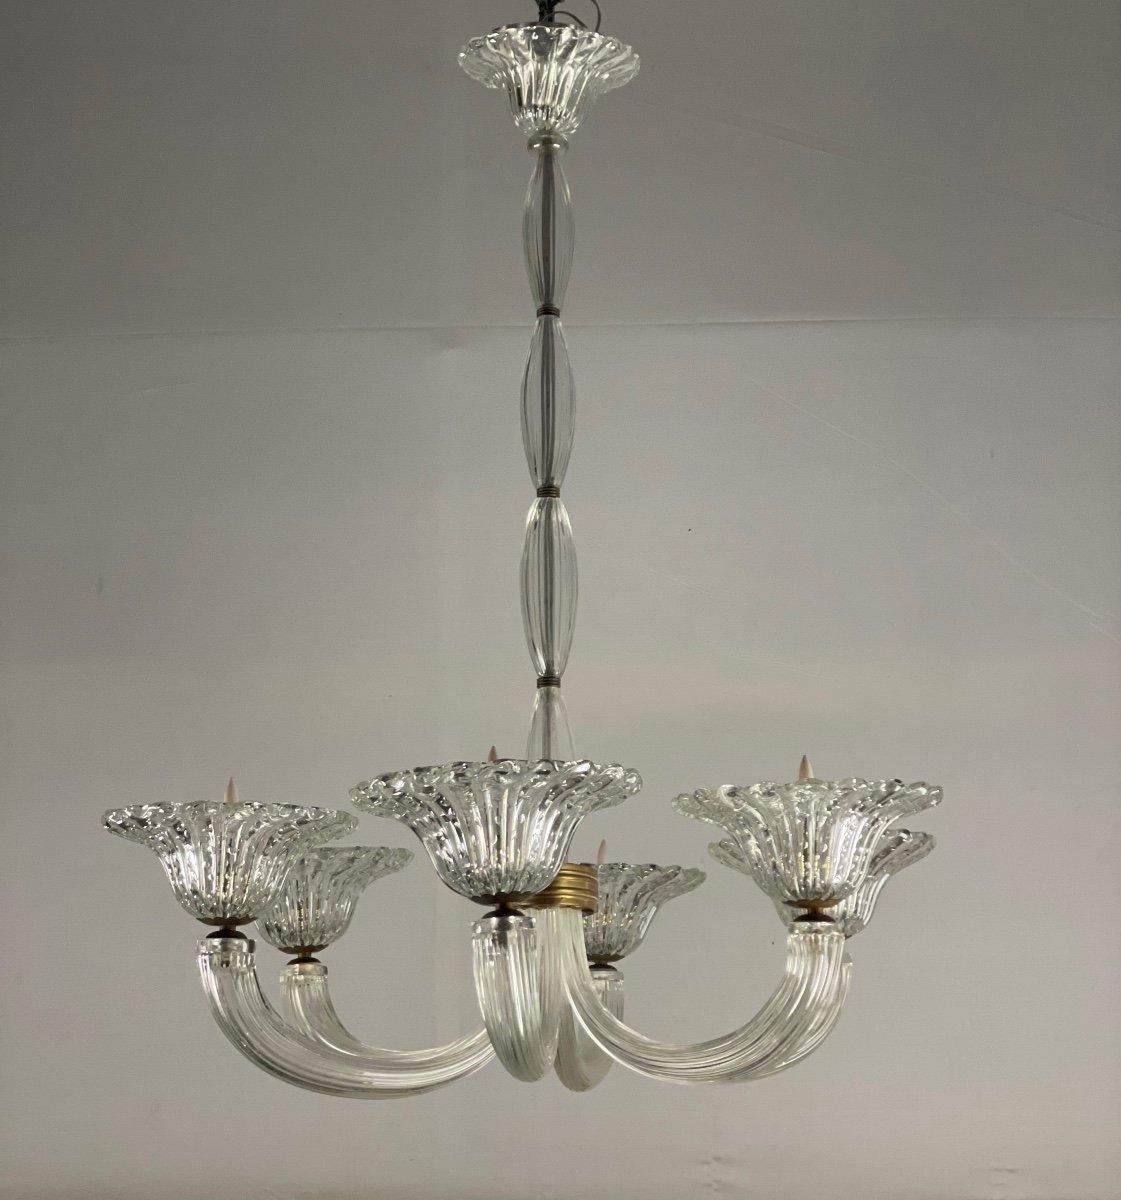 Venetian chandelier in Murano glass, 6 arms of light, new electrification.